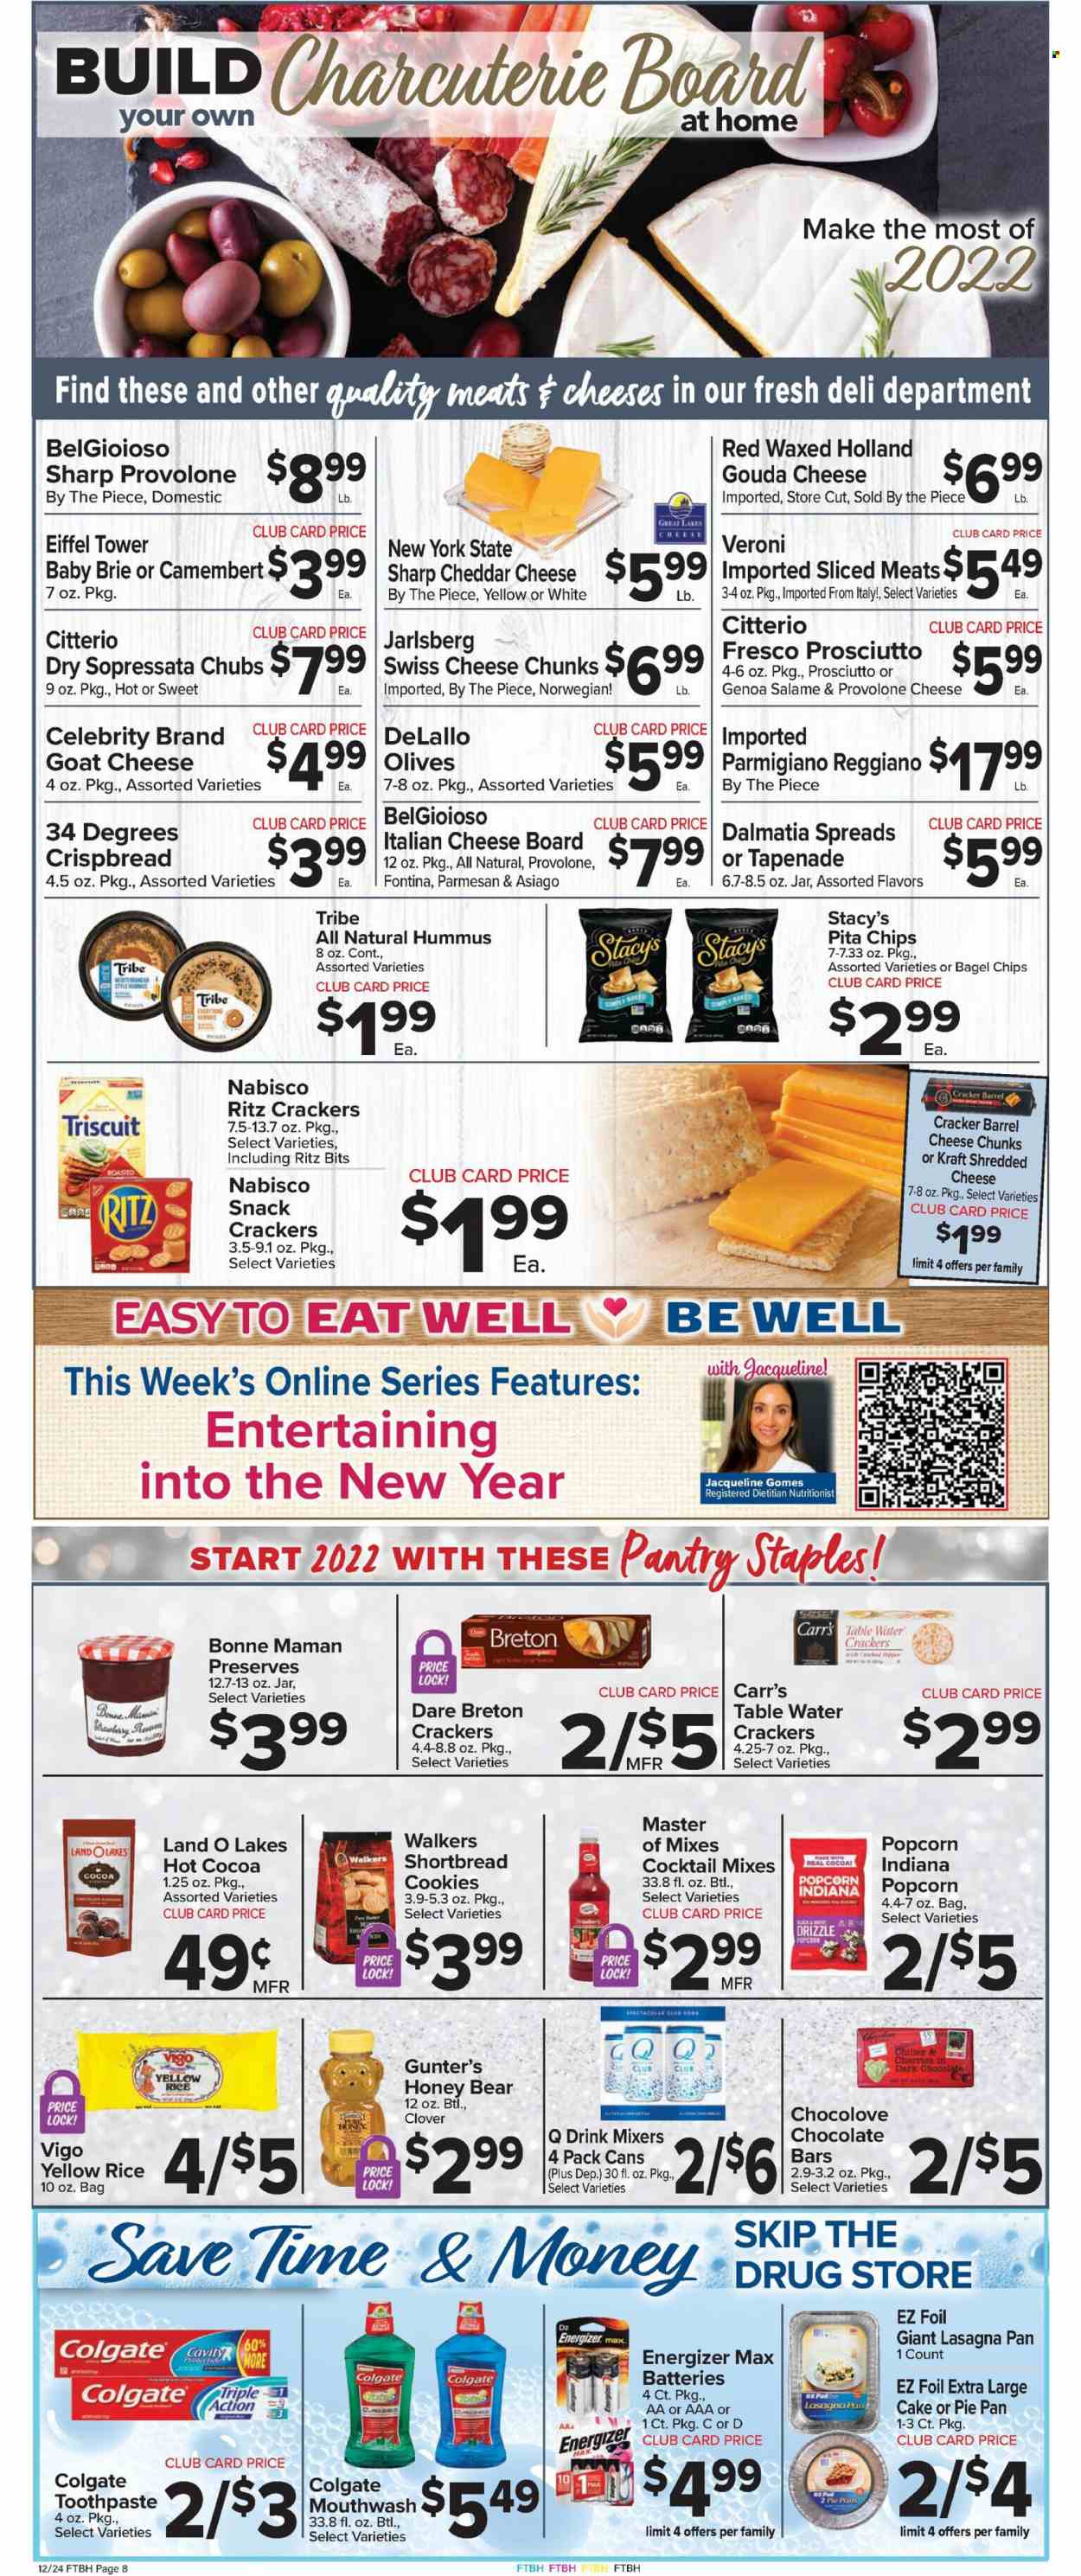 thumbnail - Foodtown Flyer - 12/24/2021 - 12/30/2021 - Sales products - bagels, cake, pie, crispbread, cherries, lasagna meal, Kraft®, prosciutto, hummus, asiago, camembert, Fontina, goat cheese, gouda, shredded cheese, swiss cheese, parmesan, brie, Parmigiano Reggiano, Provolone, Clover, cookies, snack, crackers, dark chocolate, RITZ, chocolate bar, chips, popcorn, pita chips, olives, rice, honey, soda, hot cocoa, Colgate, toothpaste, mouthwash, pan, cheese board, battery, Energizer. Page 2.